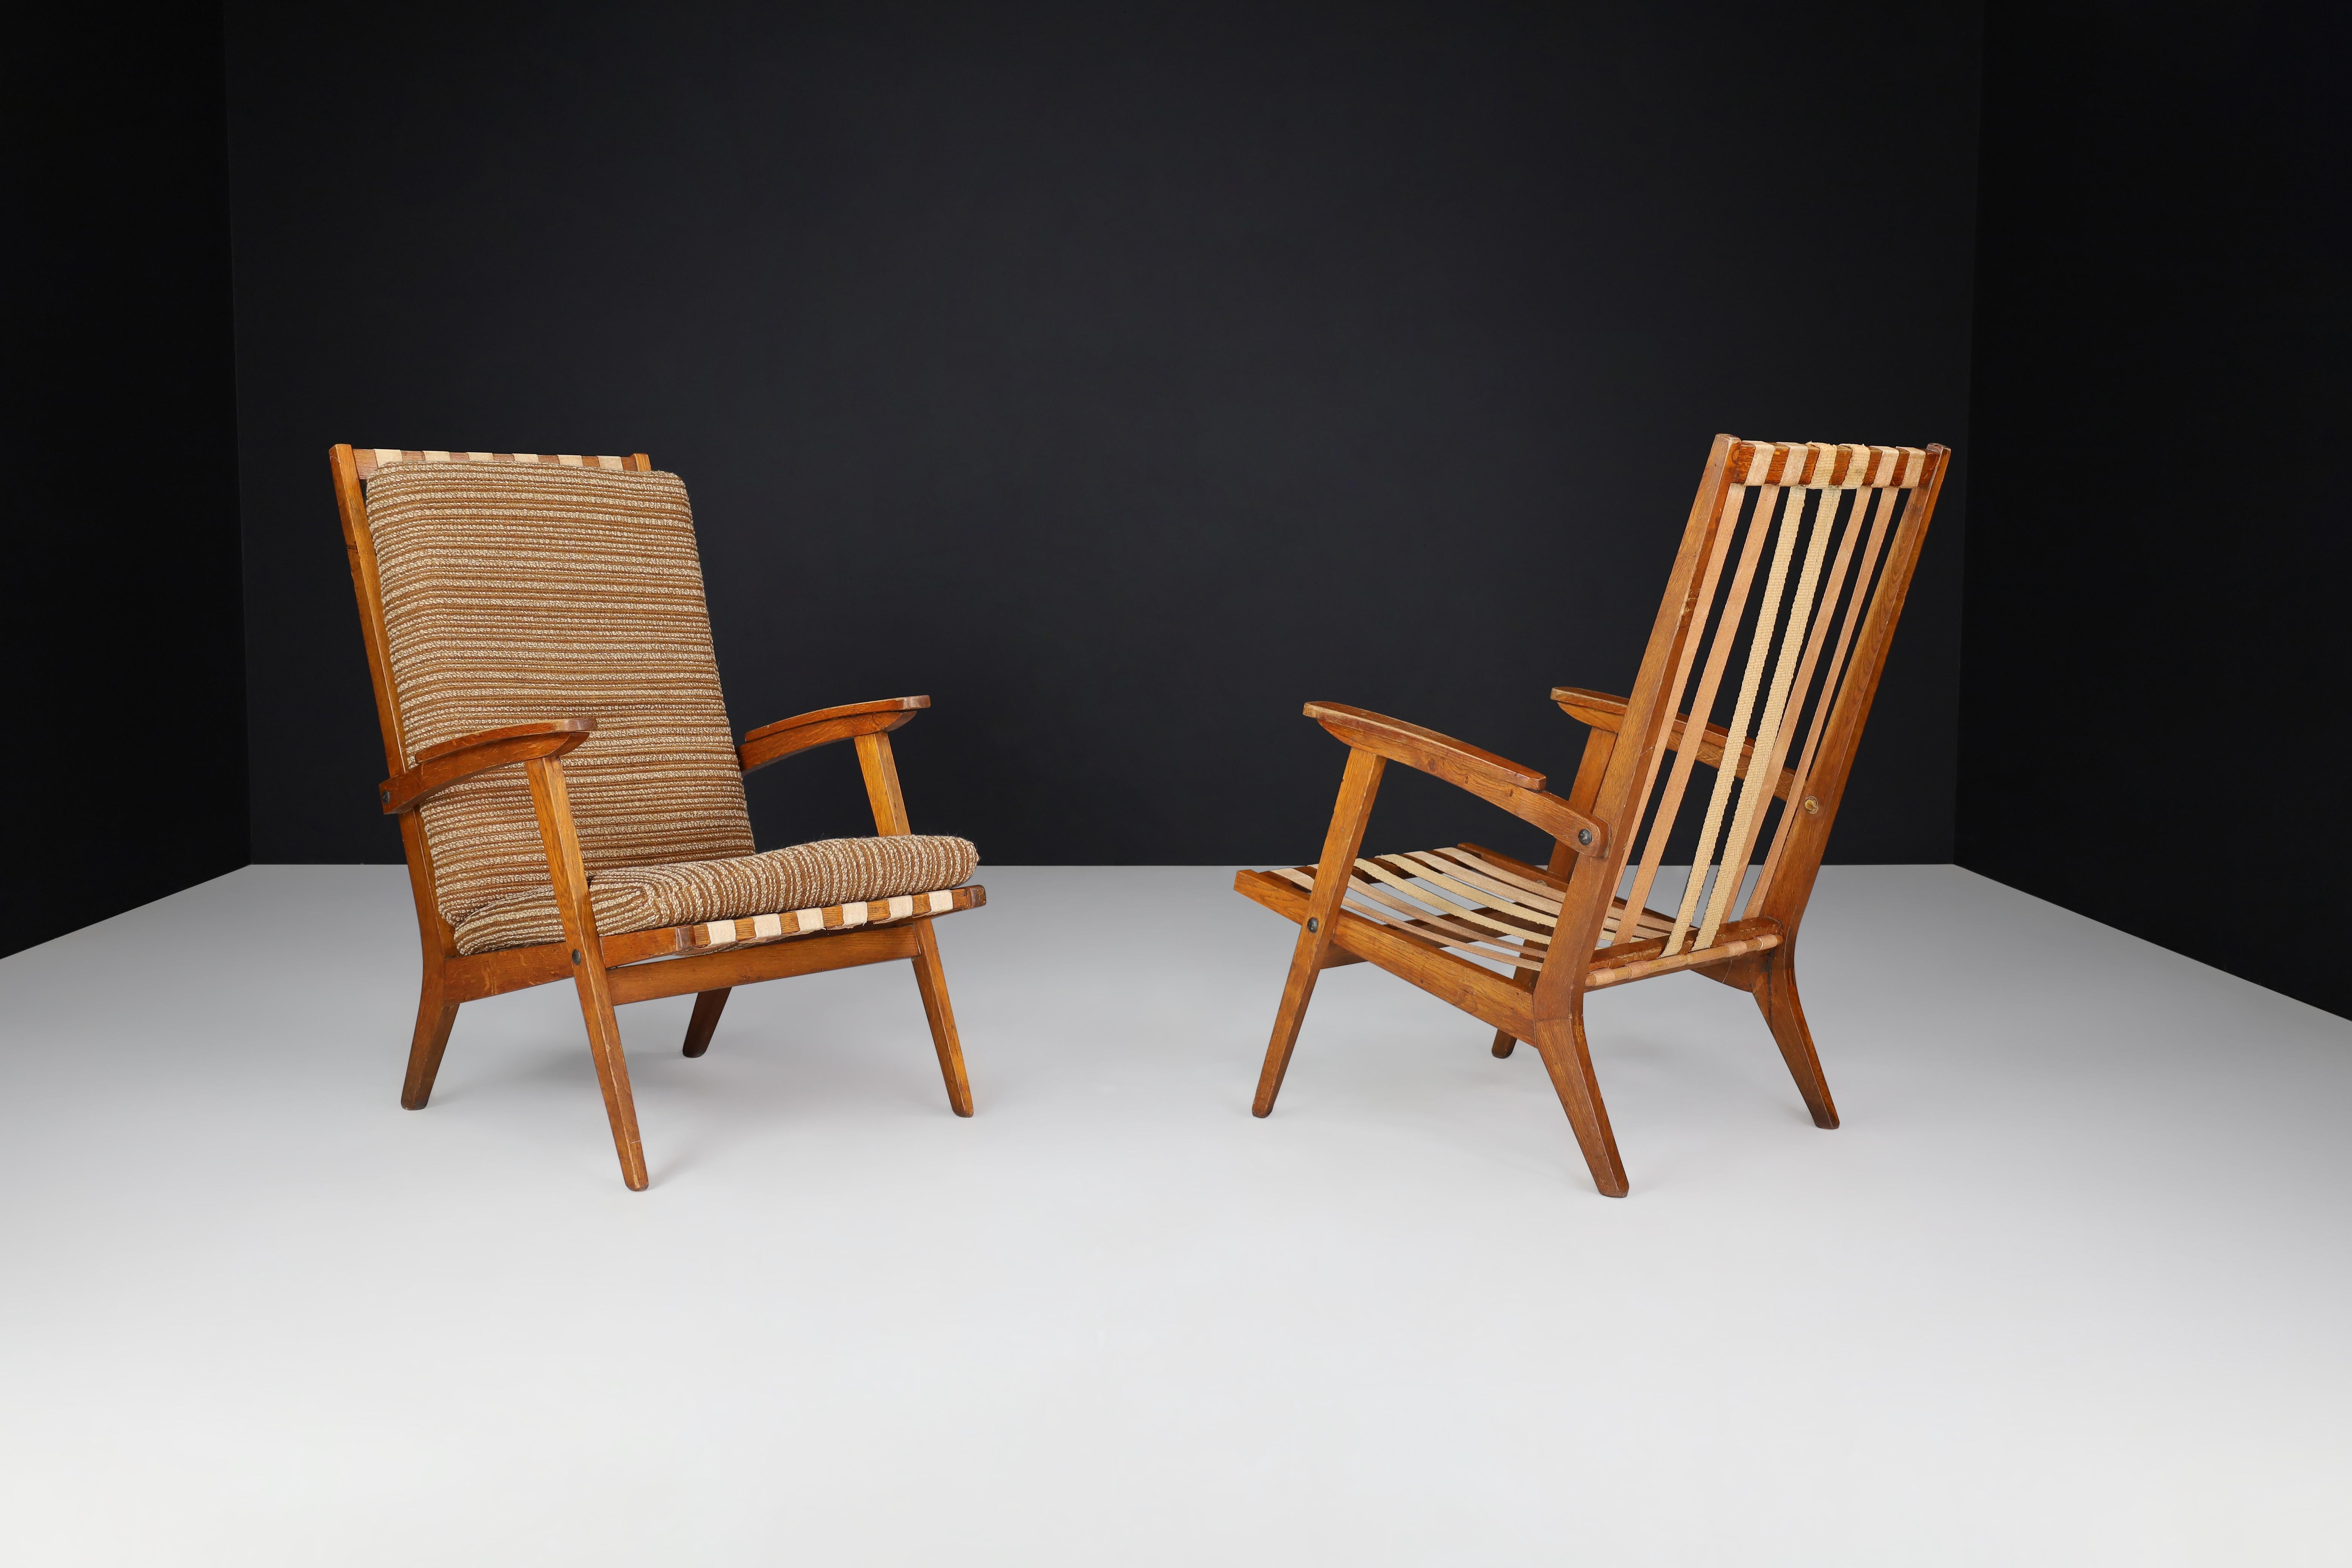 Oak Sculptural Lounge Chairs with Brown Upholstery, France, 1950s For Sale 2